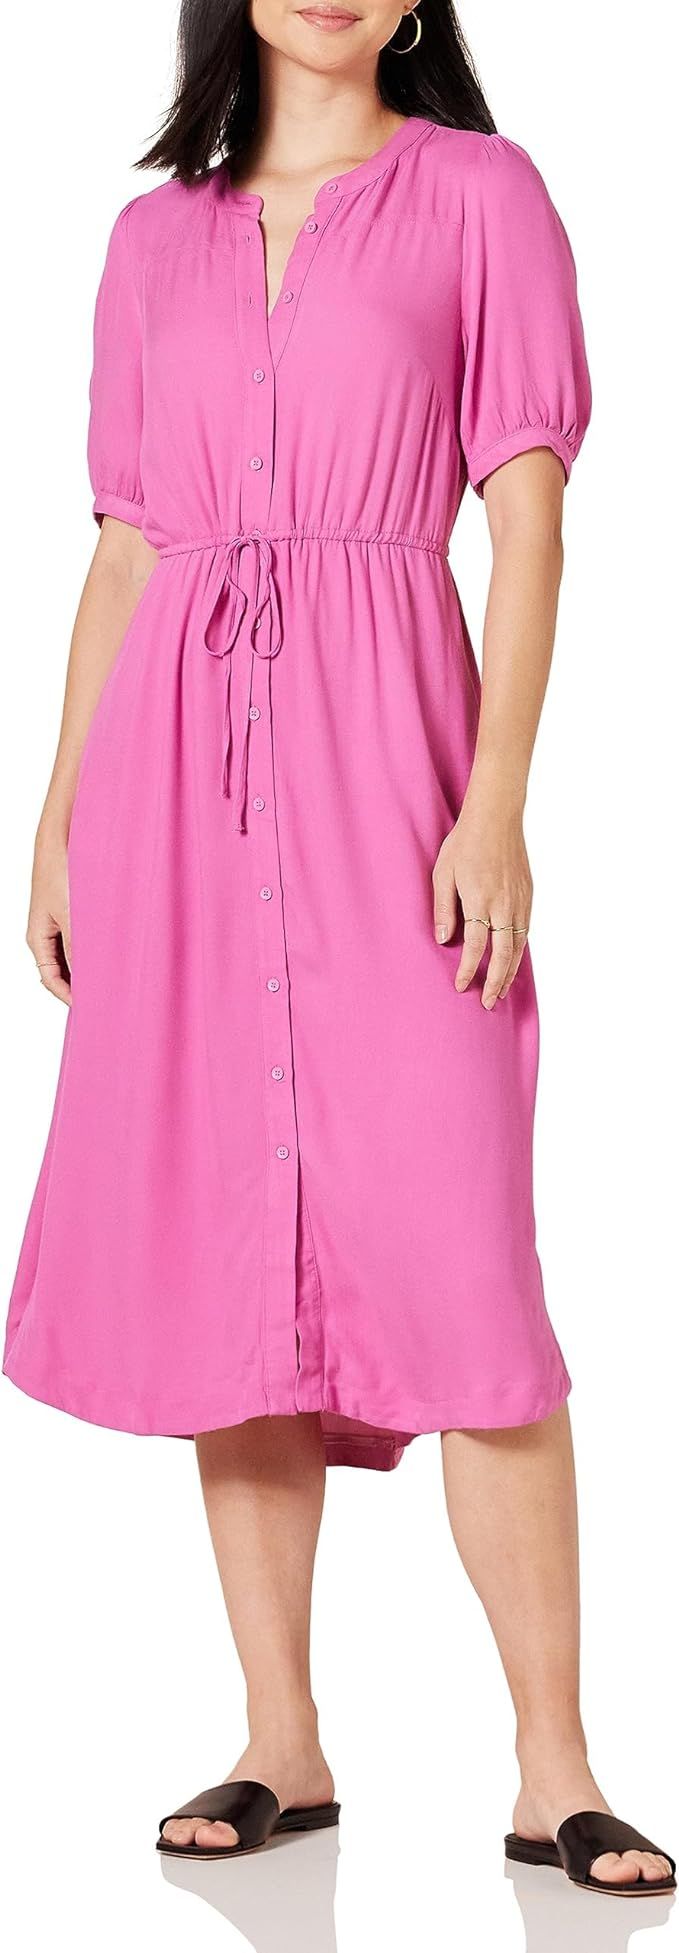 Amazon Essentials Women's Relaxed Fit Half-Sleeve Waisted Midi A-Line Dress | Amazon (US)